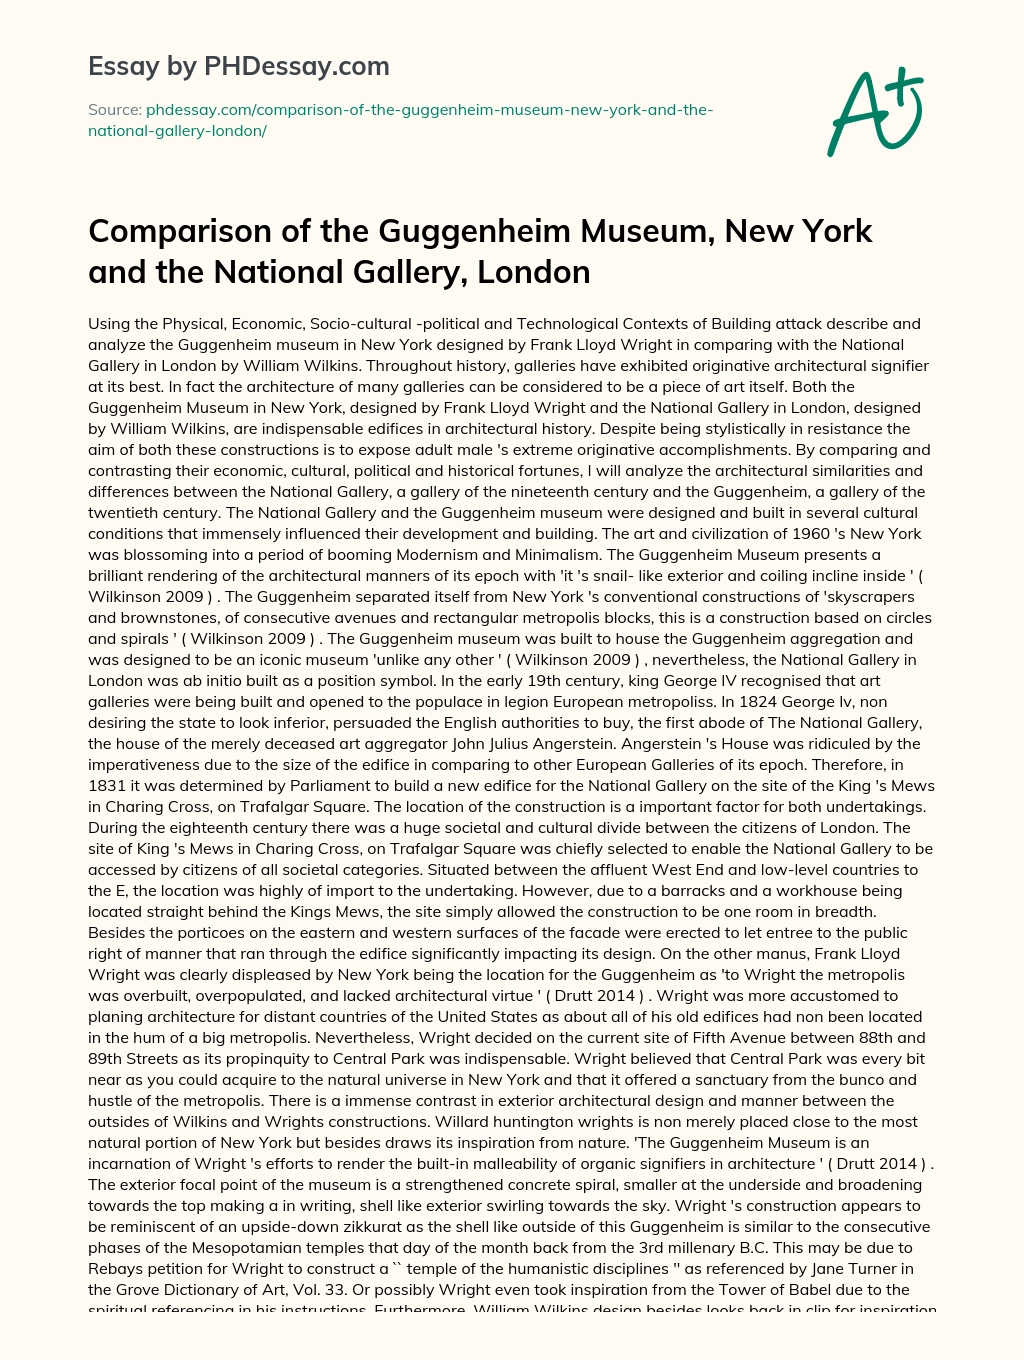 Comparison of the Guggenheim Museum, New York and the National Gallery, London essay